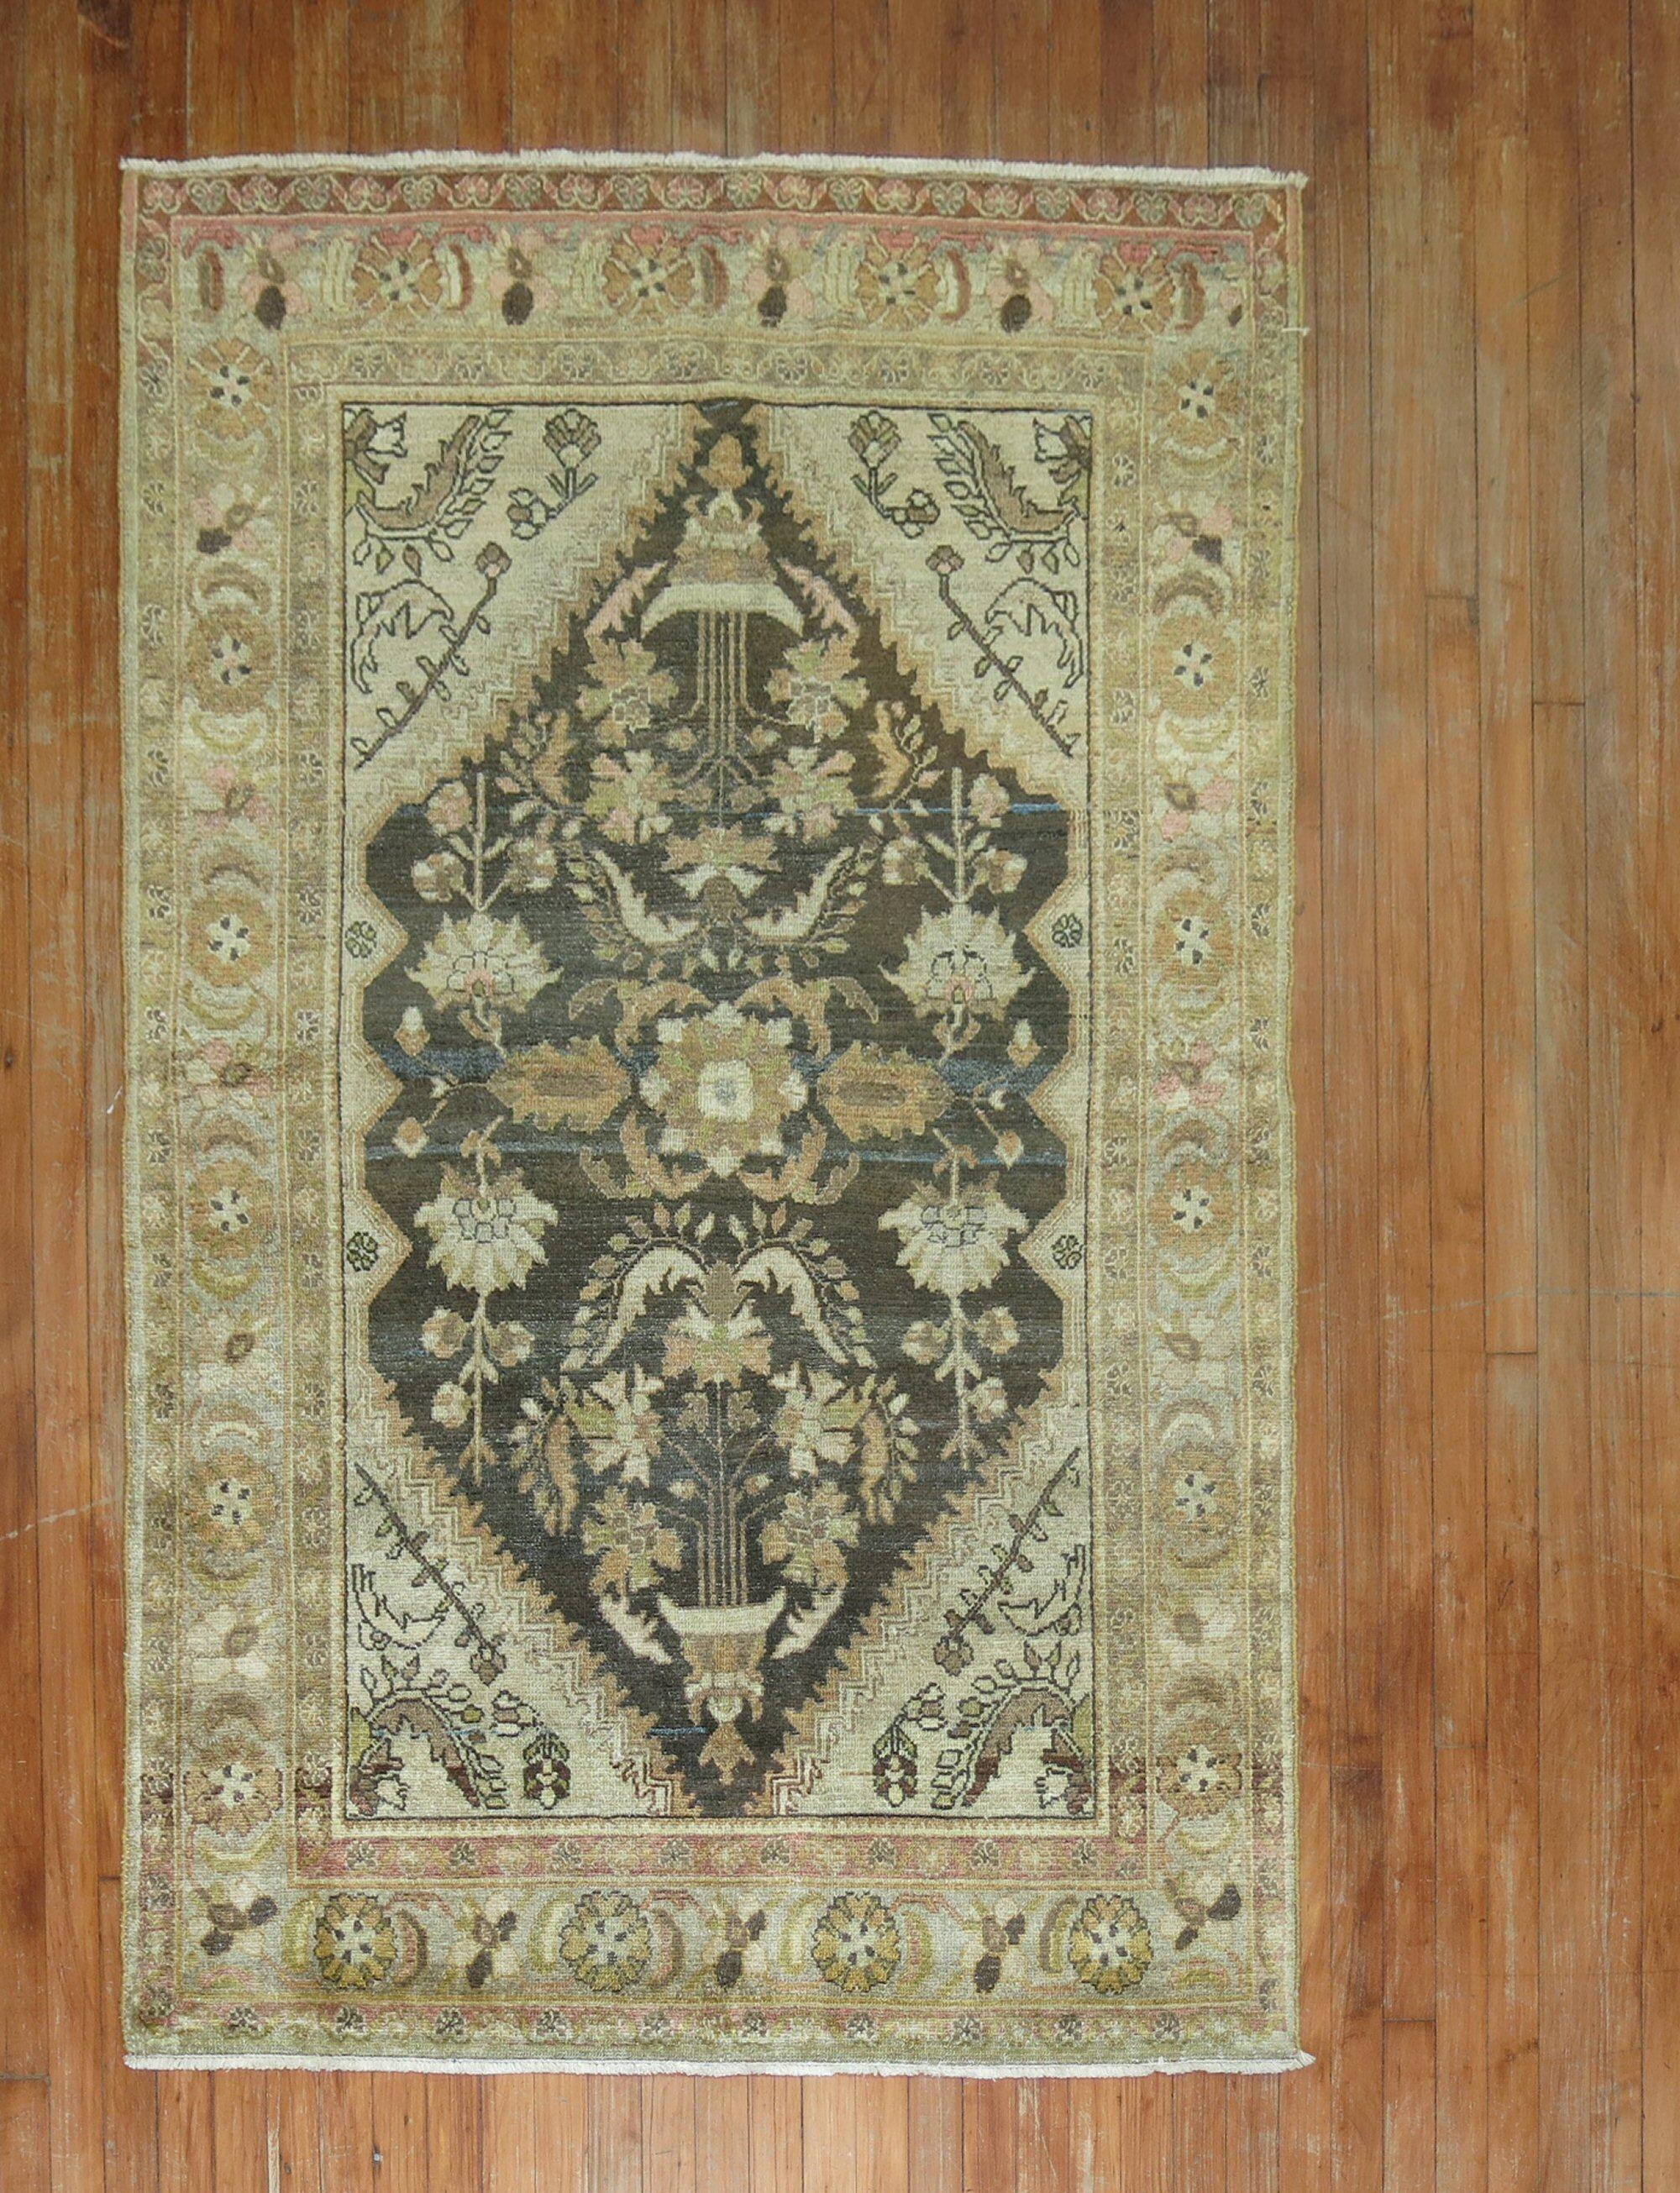 Antique High Decorative Persian Malayer rug from the early 20th century in predominantly brown

Measures: 4'2' x 6'3''.